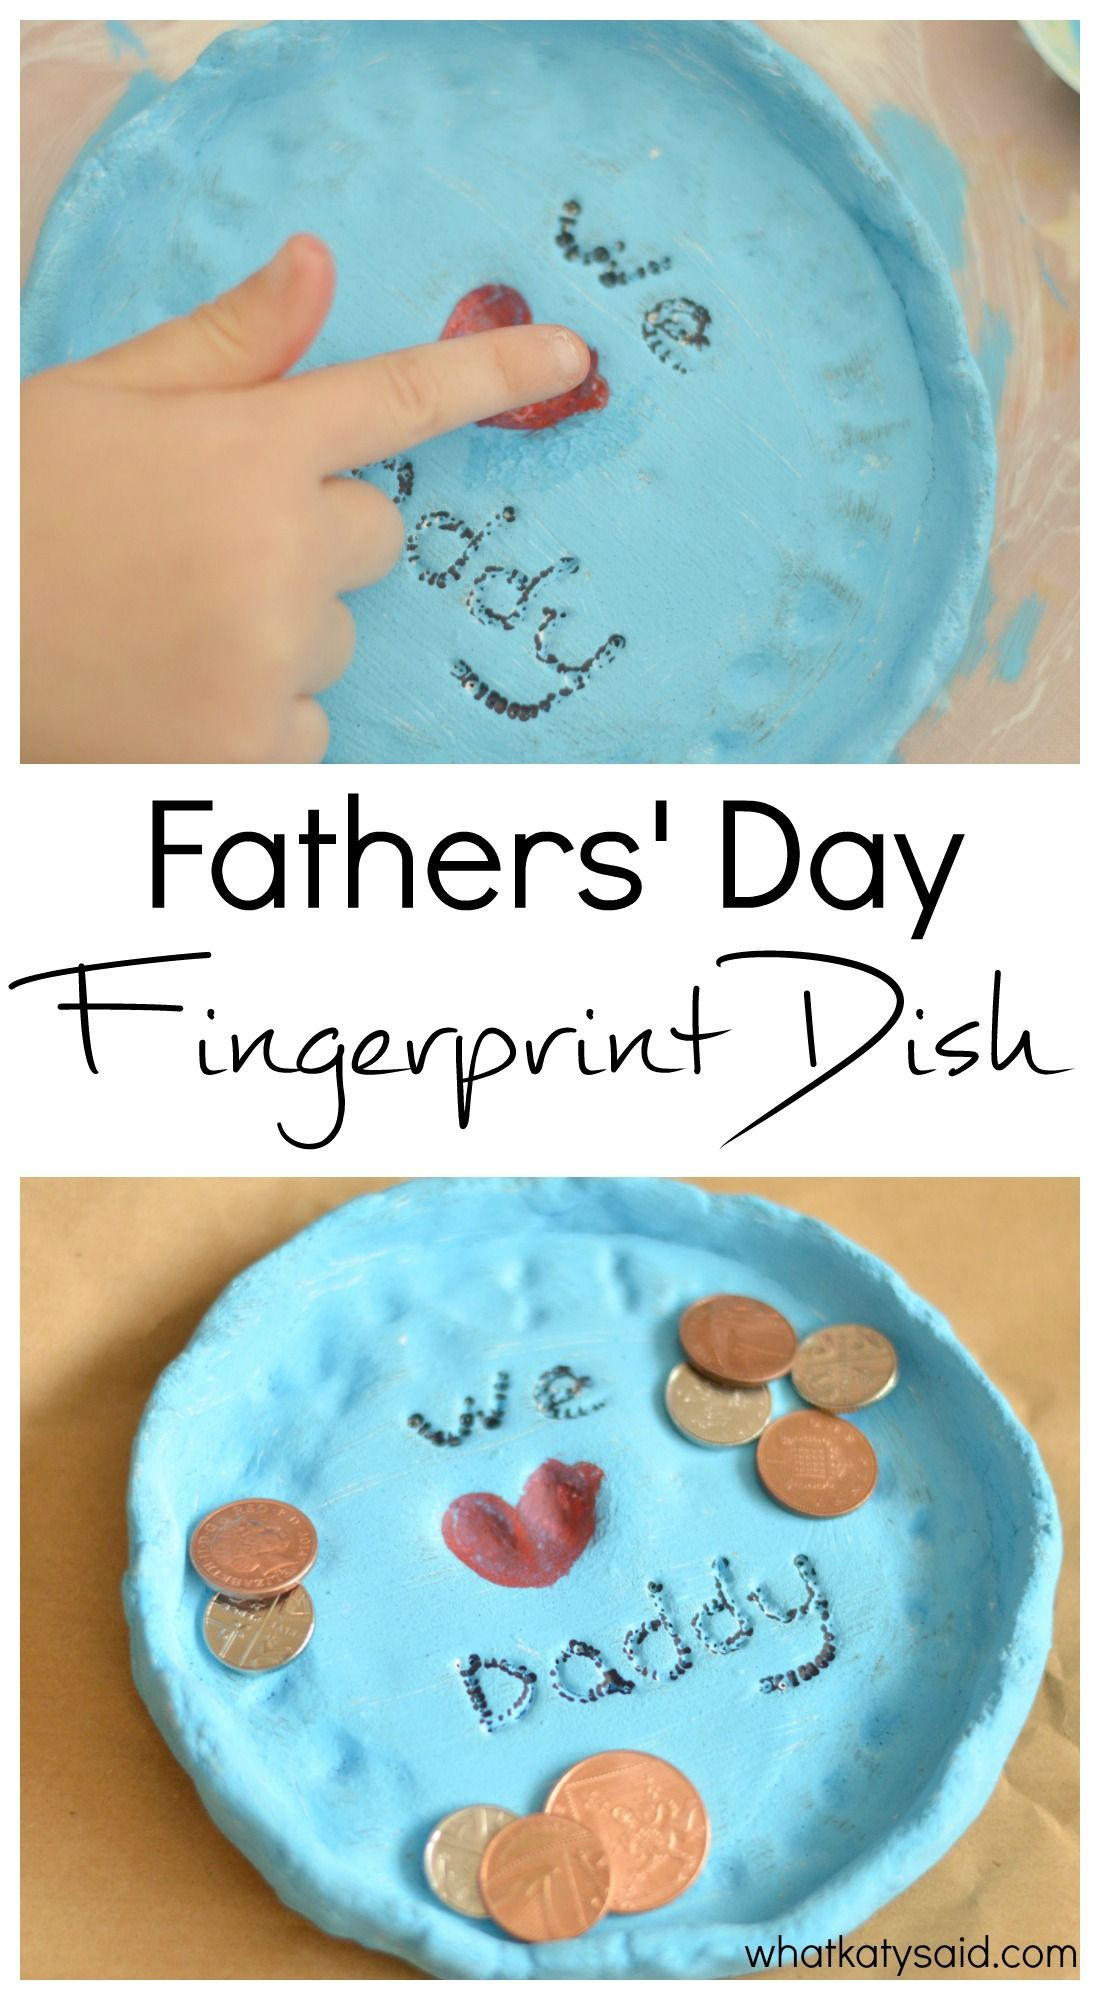 Fathers Day Craft For Toddlers
 Easy Craft Idea For Father s Day Stuff to make